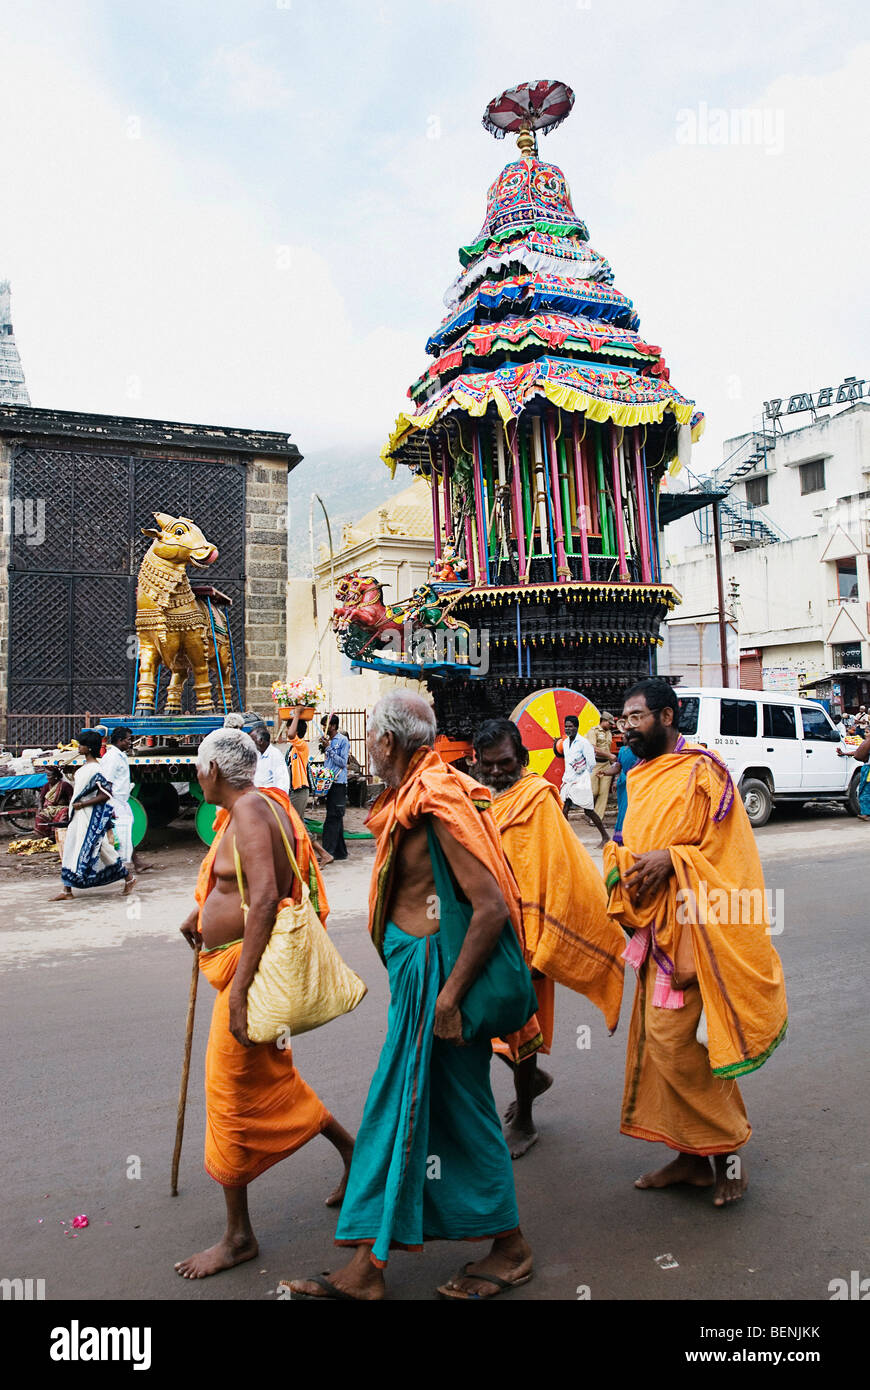 Holy men walking down the street with the Temple Chariot in the background during the Karthigai Deepam Festival celebrated in Stock Photo